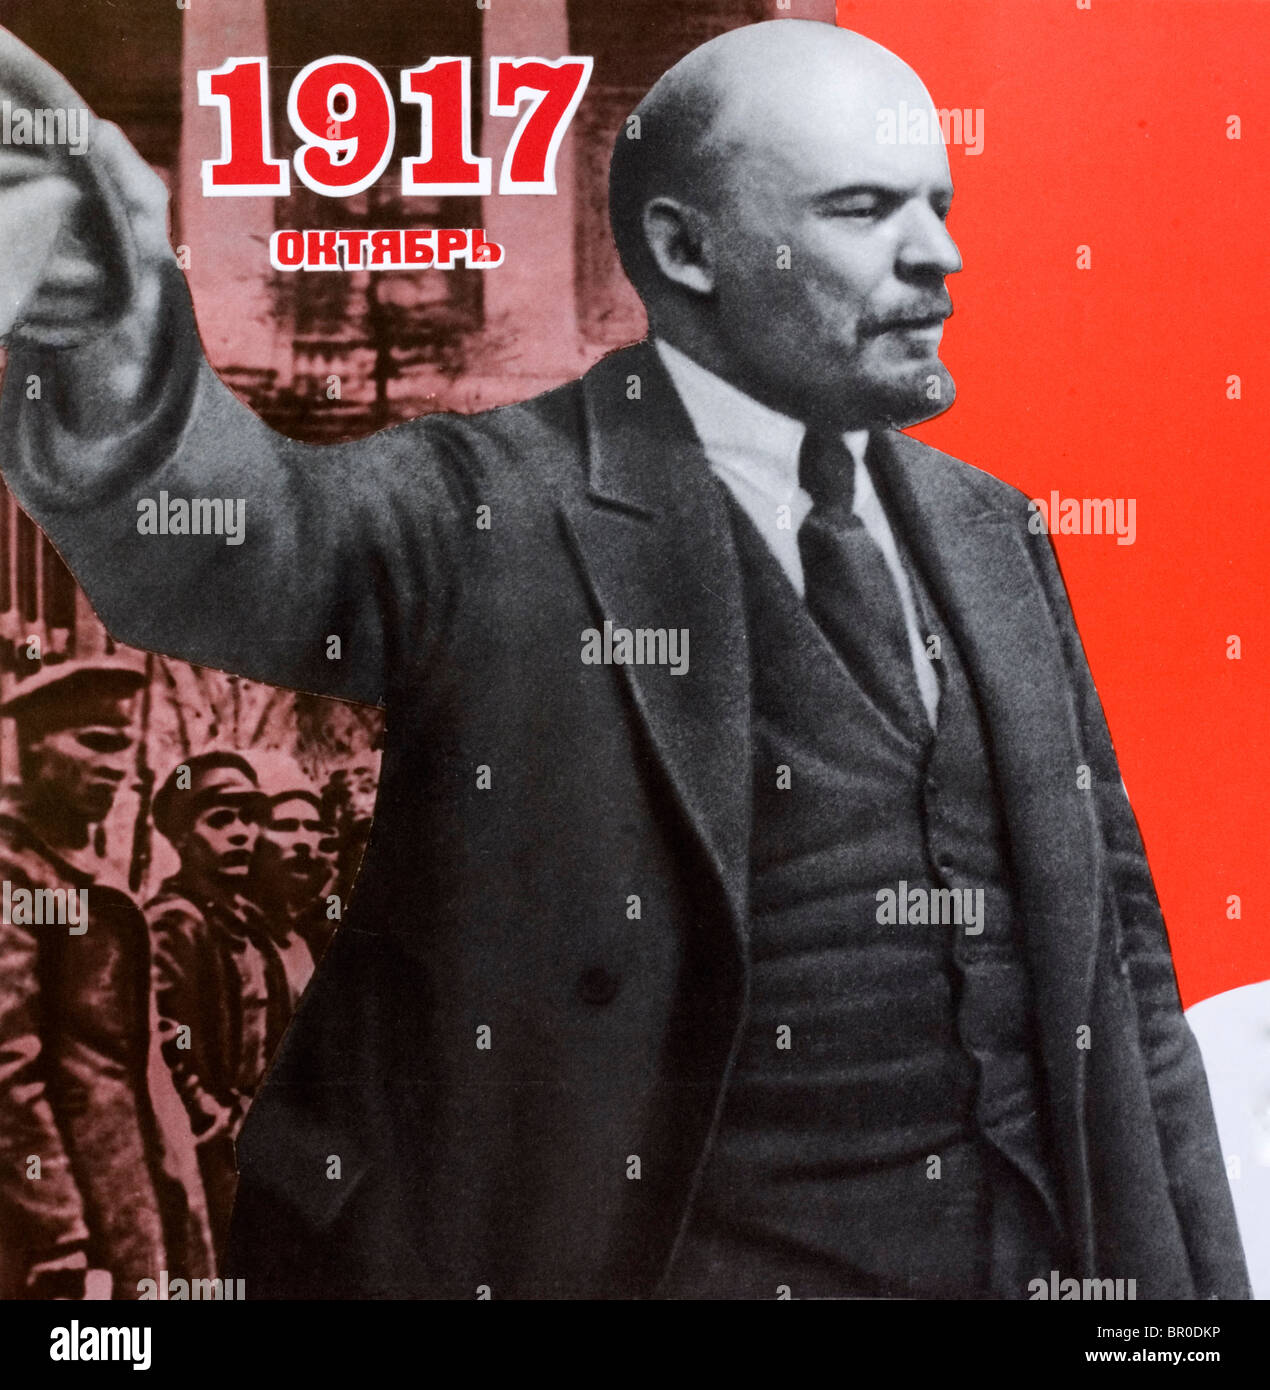 A Soviet poster commemorating the October revolution of 1917. Lenin defining the course of the Russian Revolution. Stock Photo